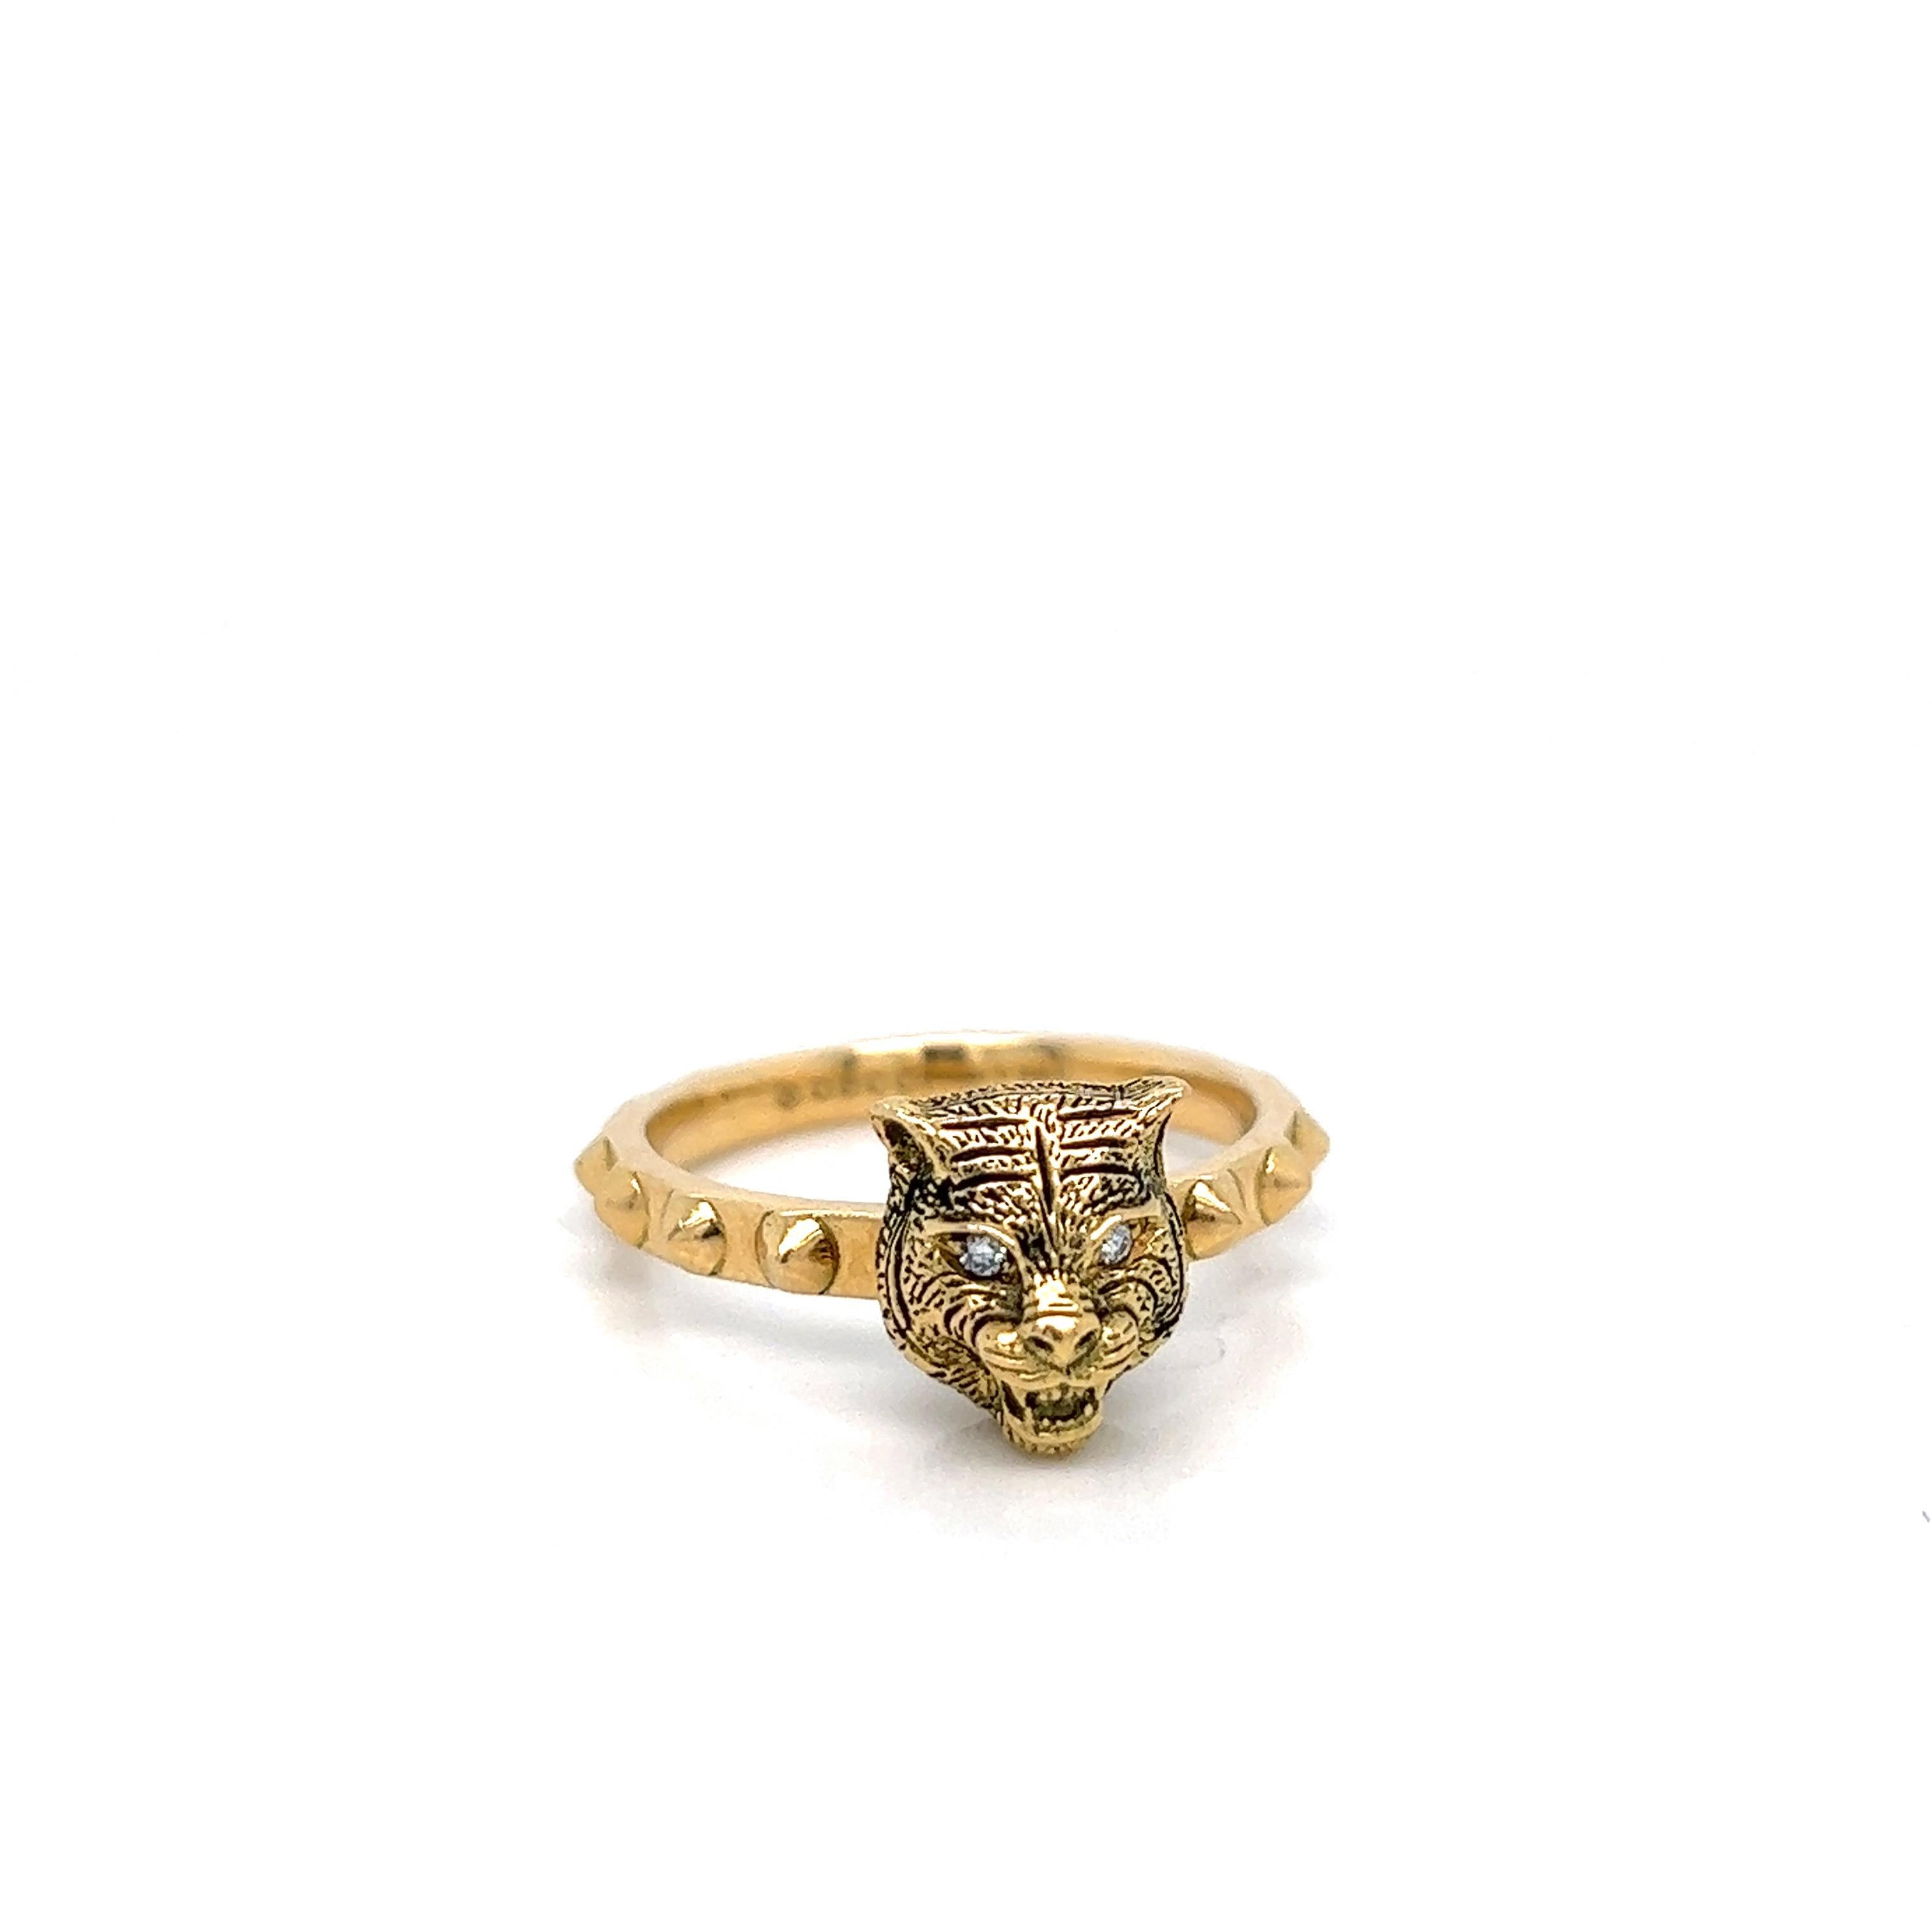 Gucci 18 karat yellow gold band ring; marked Gucci, made in Italy, Au750, 16

Feline motif for the head with eyes of round-cut diamonds of 0.20 carat

Size: 7.5-7.75 
Total weight: 7.3 grams